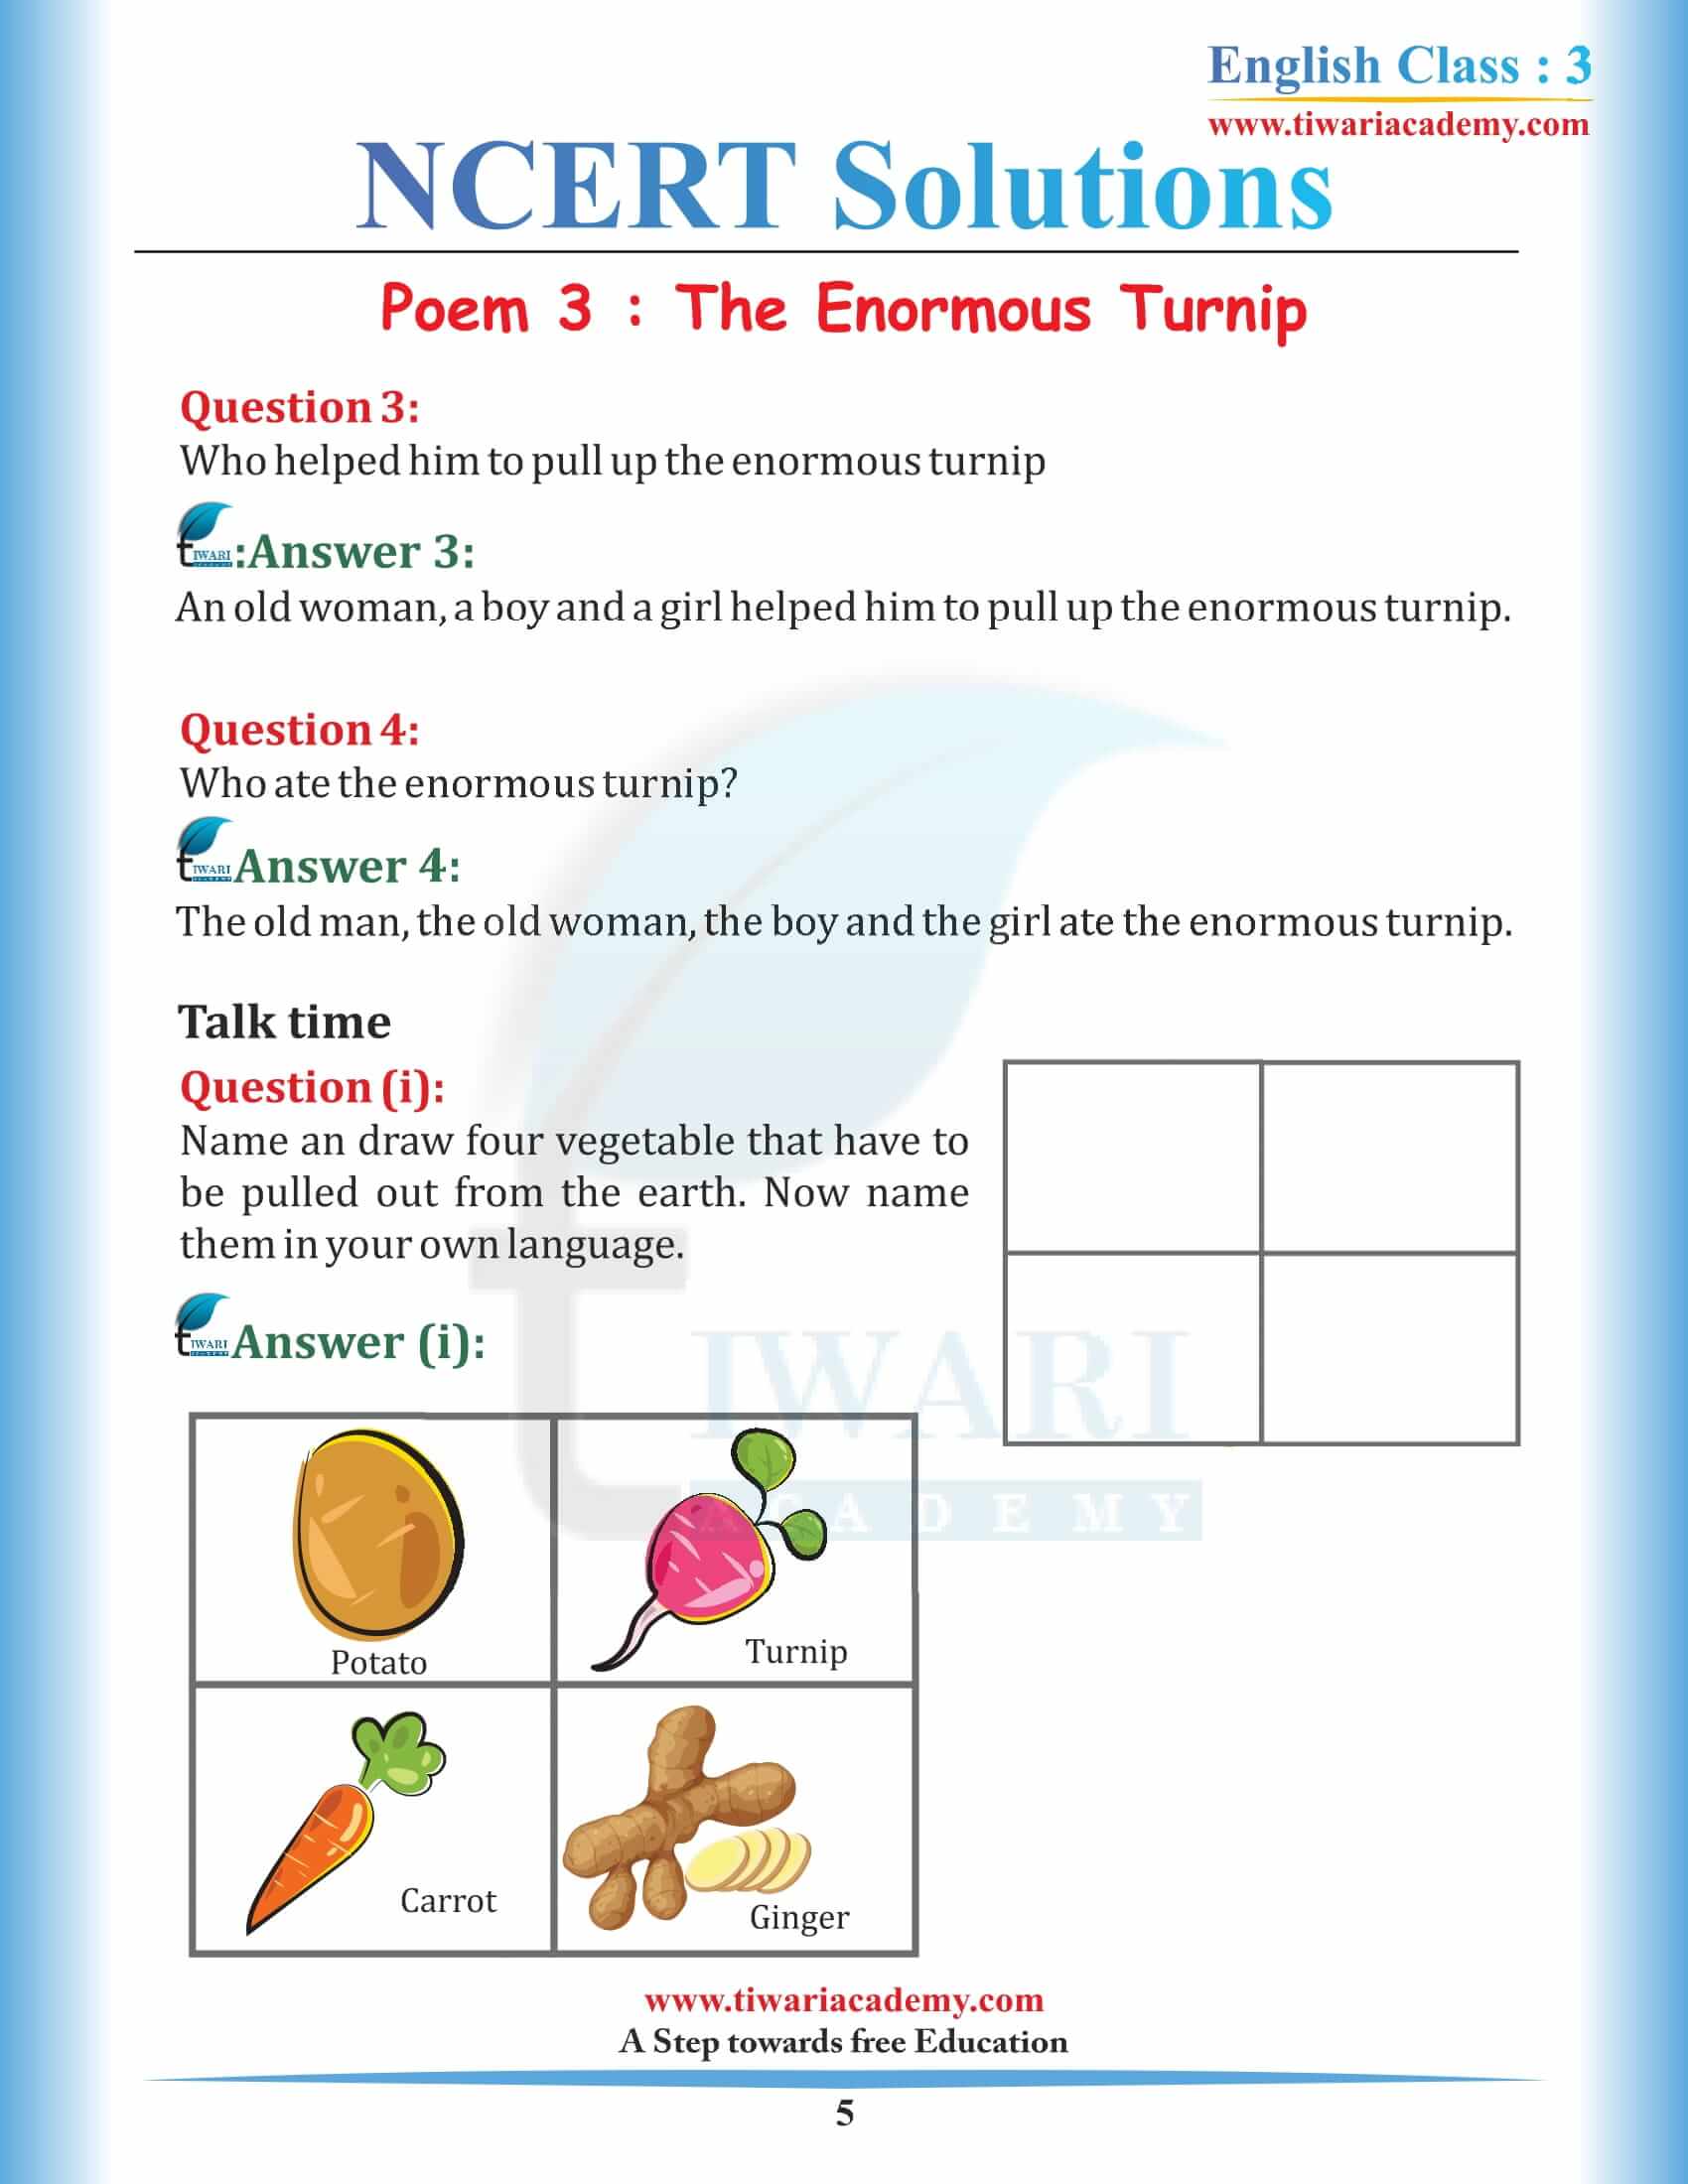 NCERT Solutions for Class 3 English Unit 3 answers